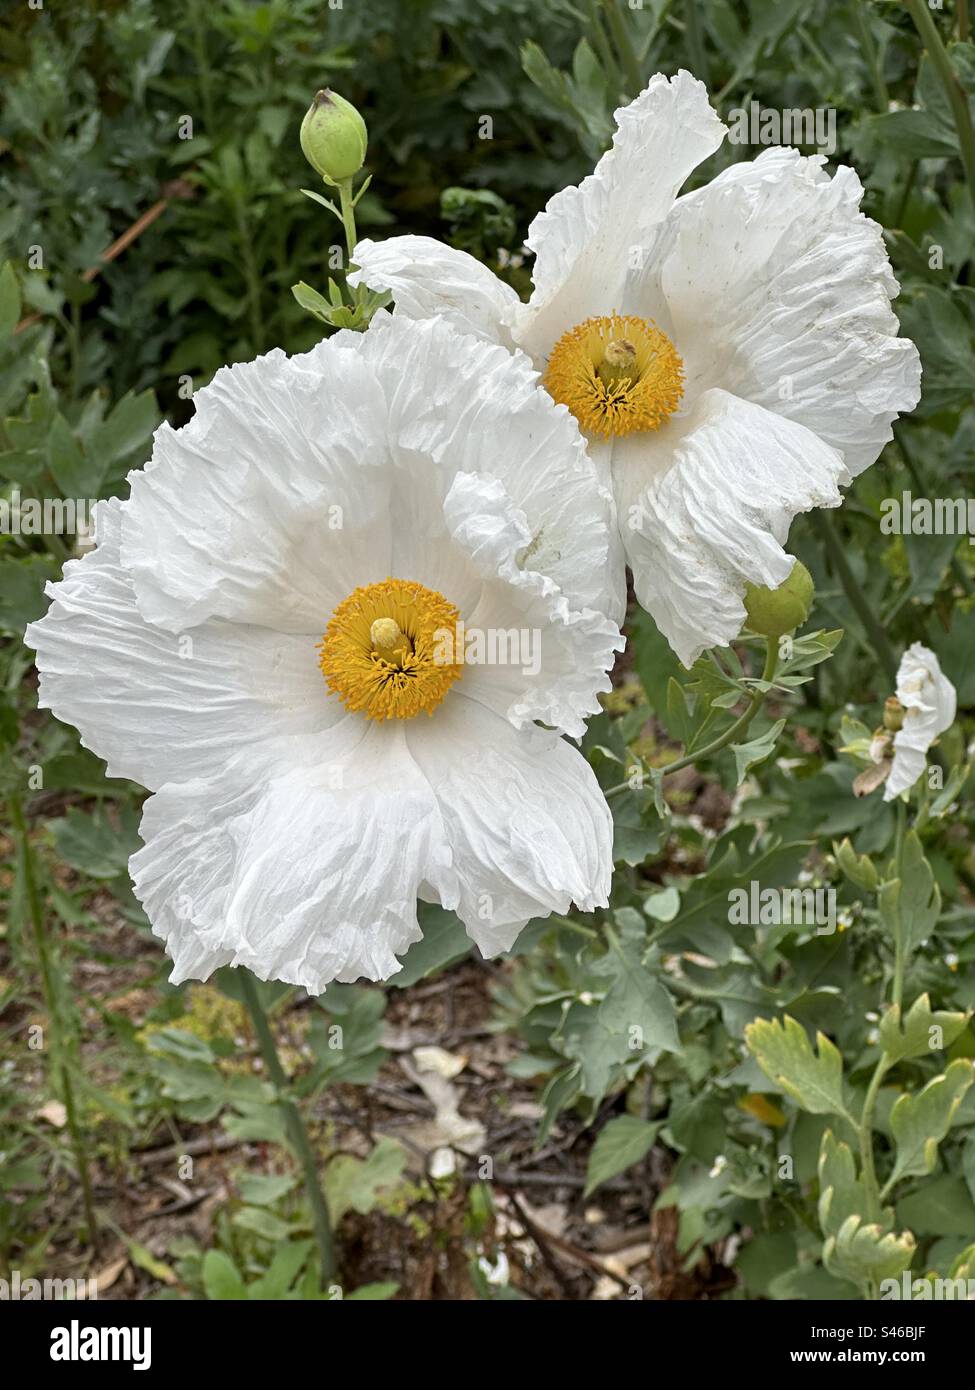 Romneya coulteri (Coulter’s matilija poppy, California tree poppy) is a perrenial species of flowering plant native to California and Baja California chaparral and coastal scrub areas. Stock Photo